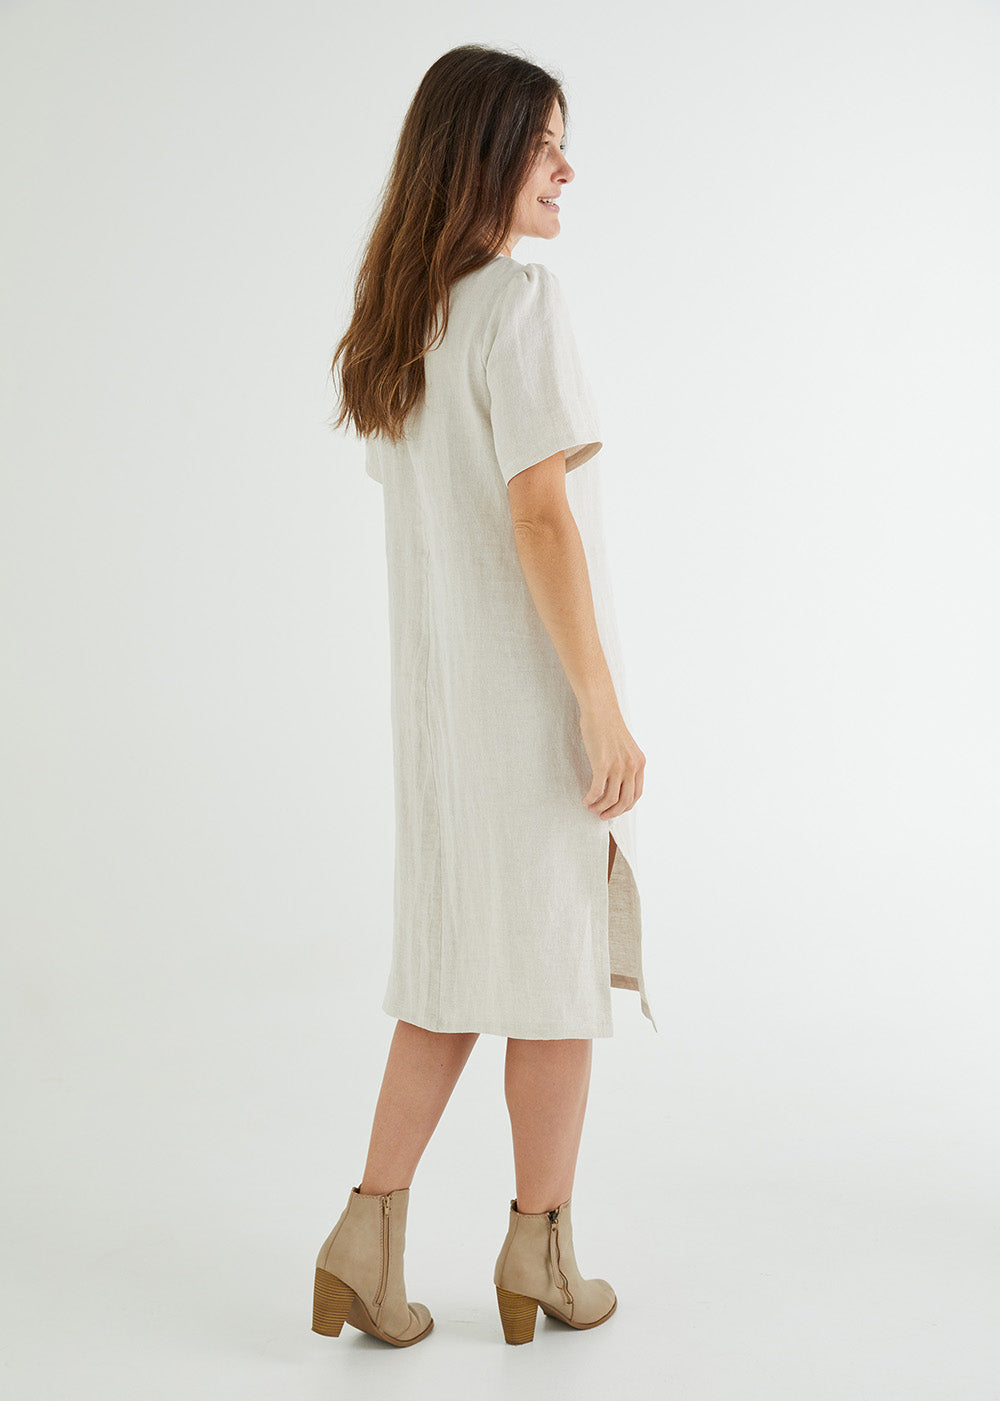 Lucy Linen Dress in Natural